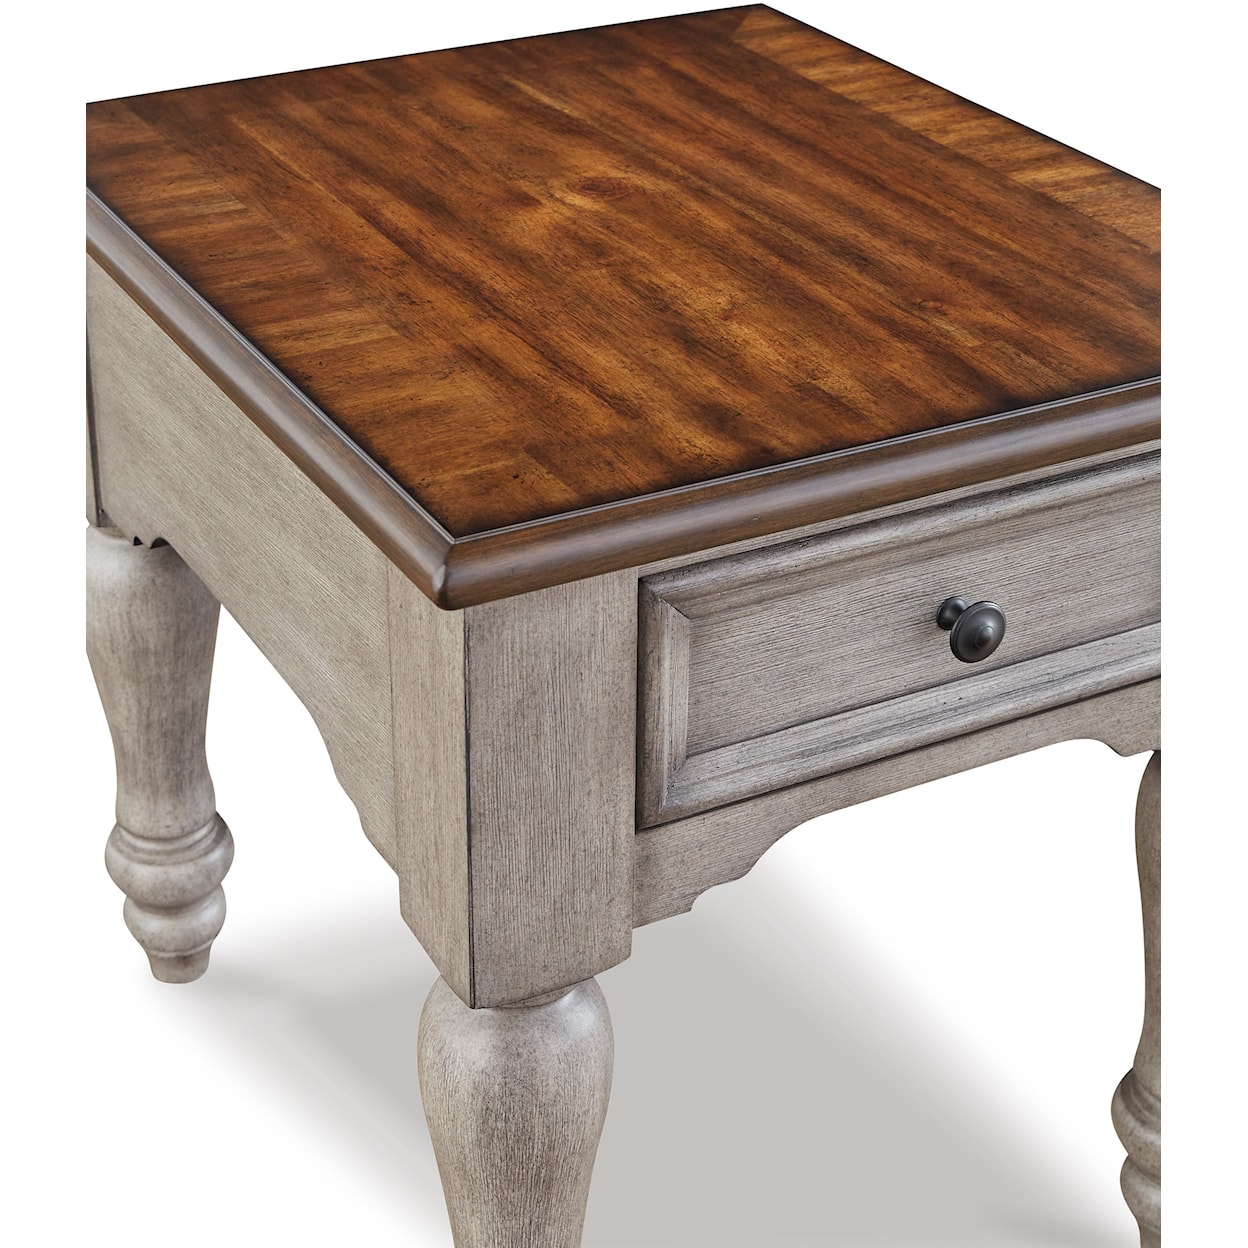 Benchcraft Lodenbay End Table